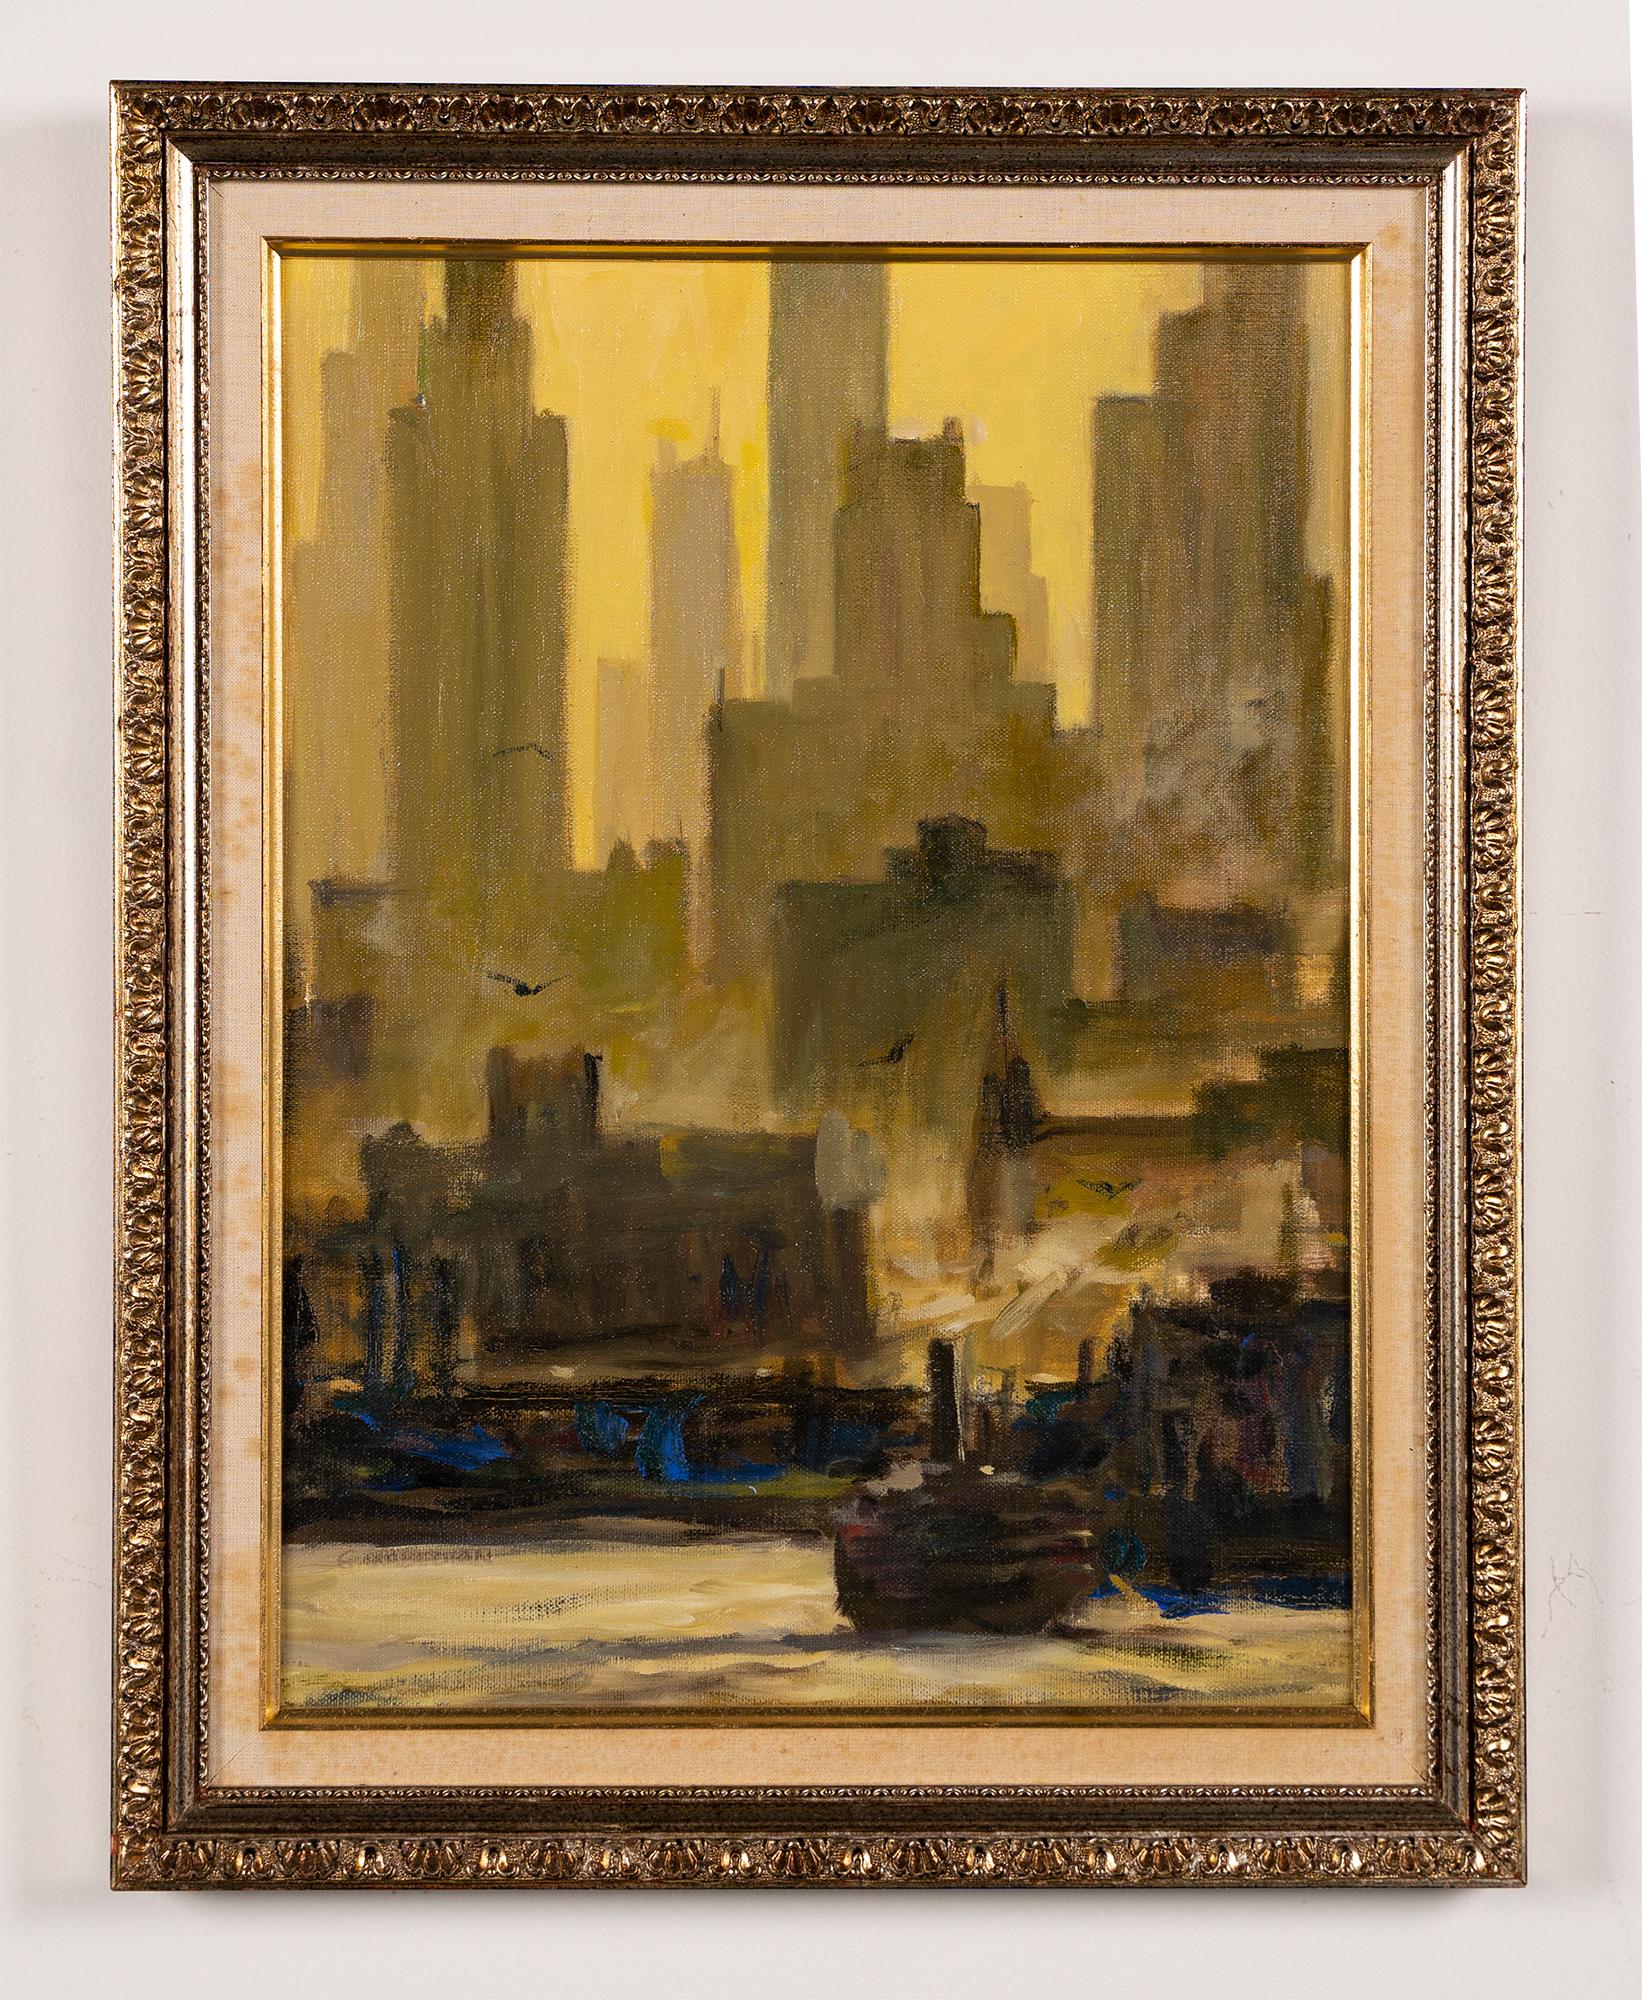 Vintage American modernist painting of New York City.  Oil on board, circa 1940.  Unsigned.  Image size, 13.5L x 17.5H.  Framed.